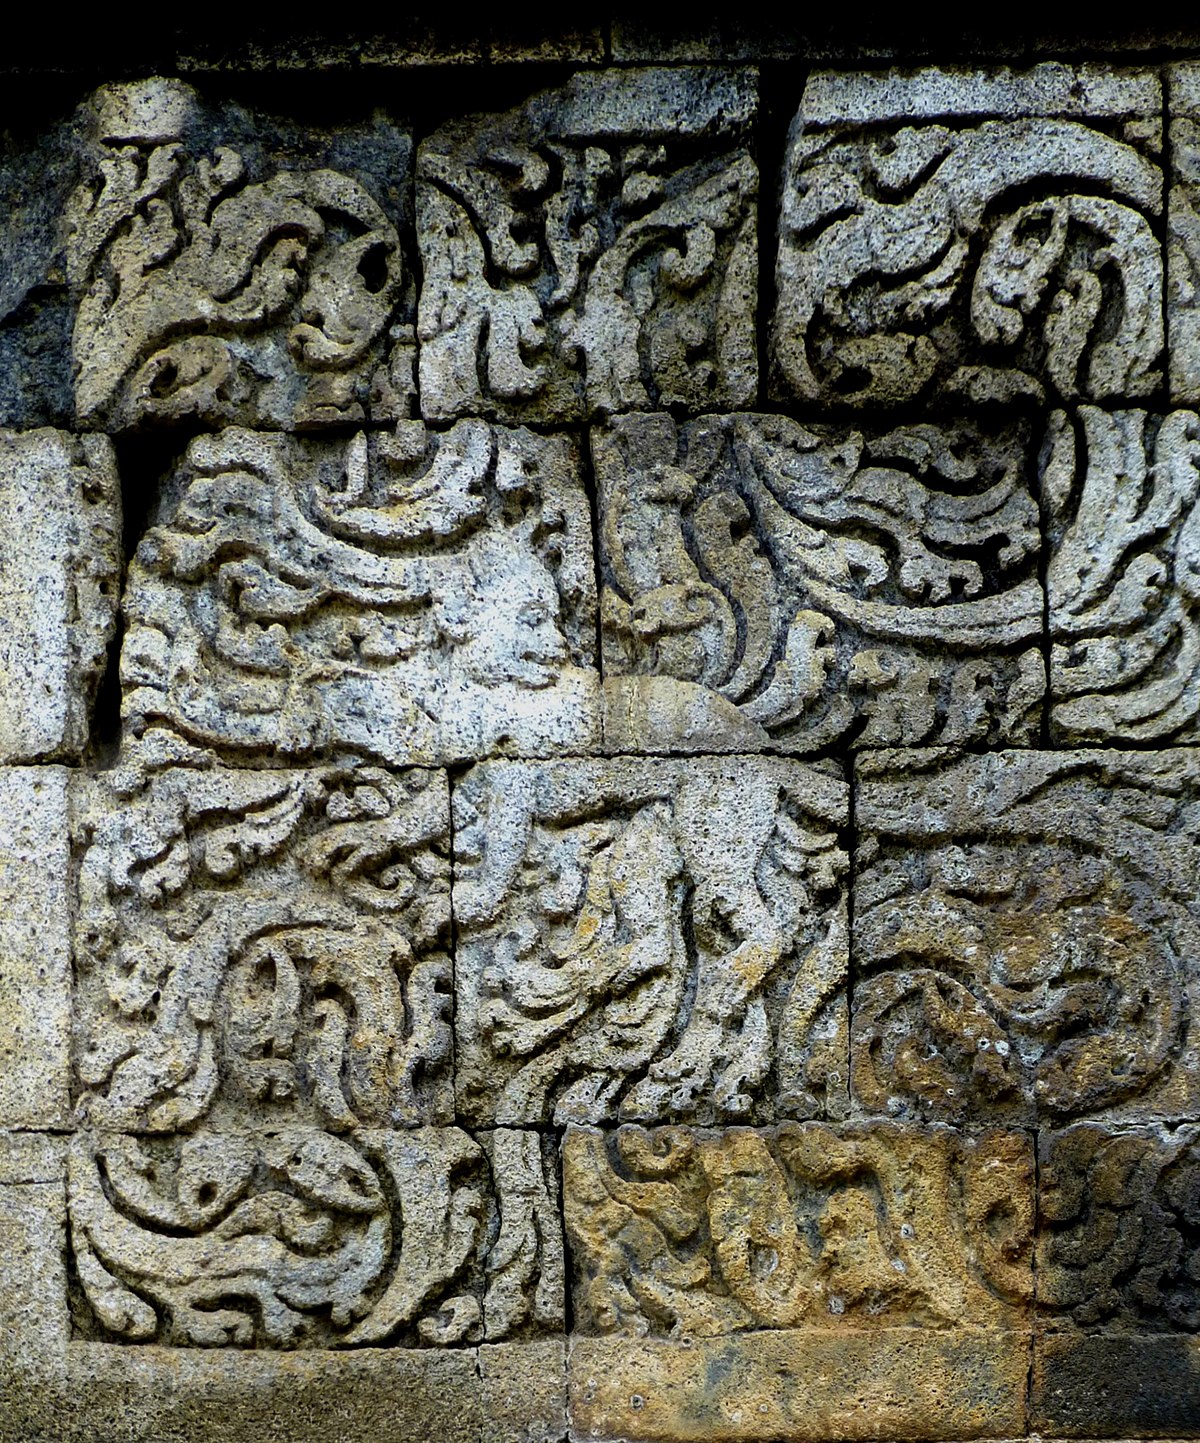 File:Candi Mendut - Reliefs - 078 Patterned Relief ...